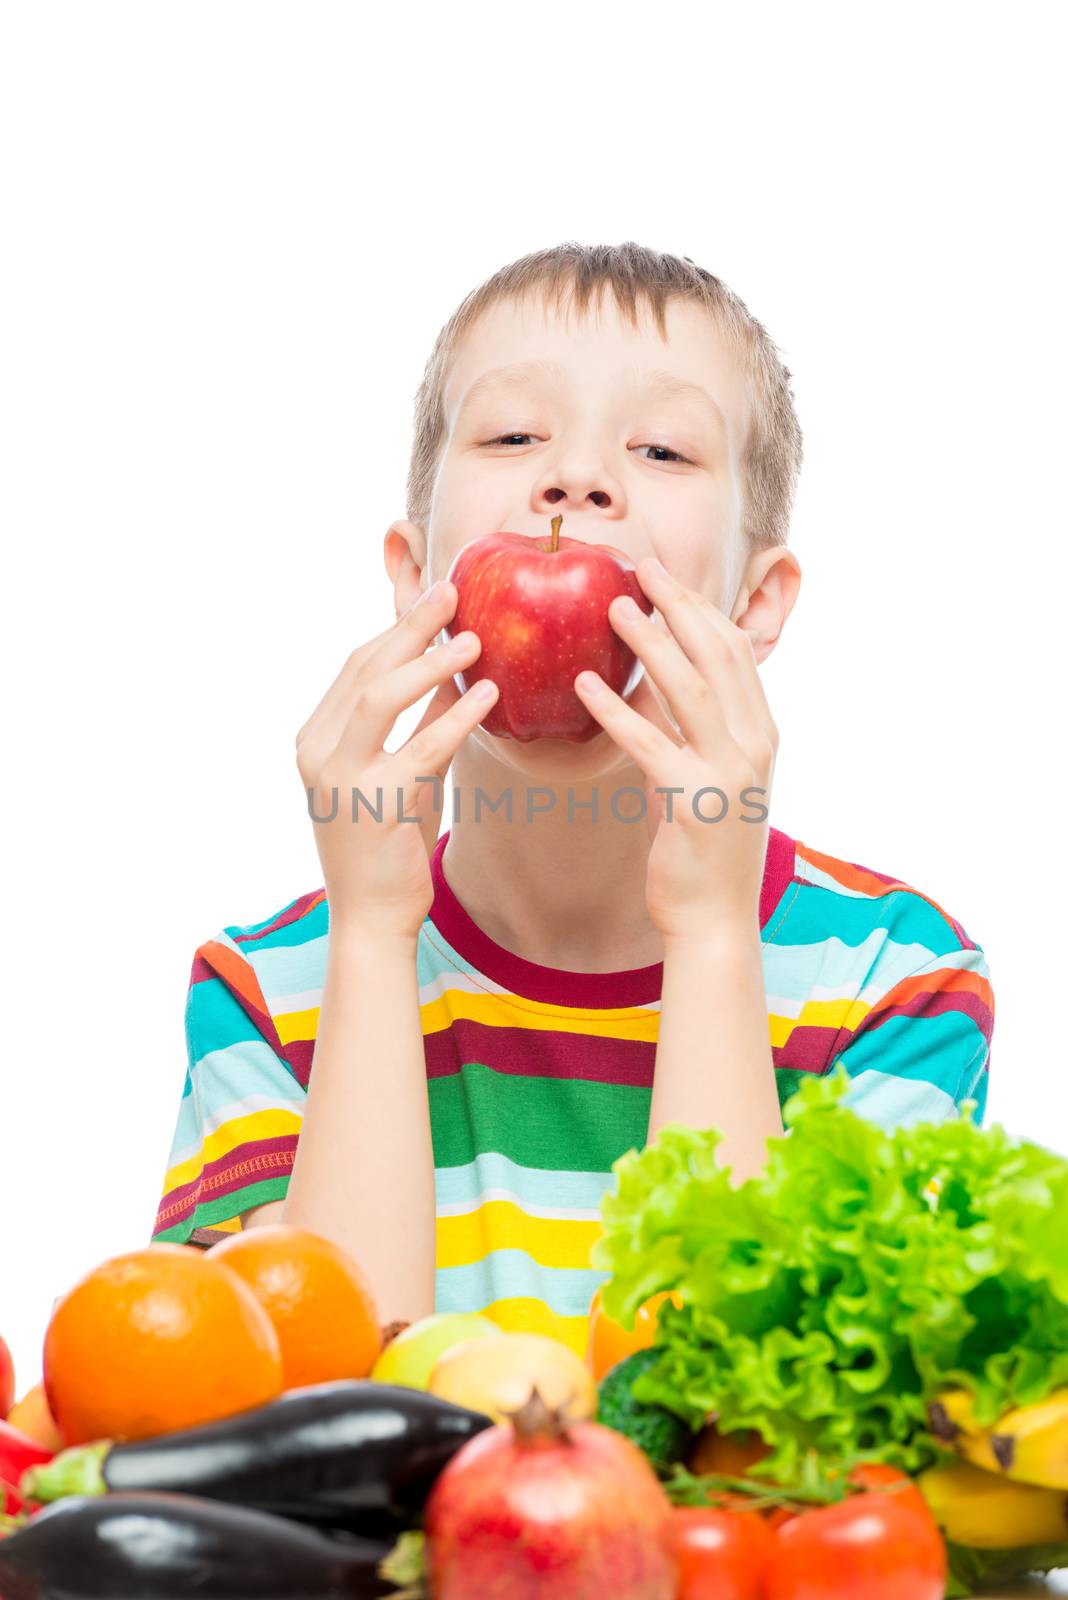 The boy eats a red juicy apple, portrait on a white background